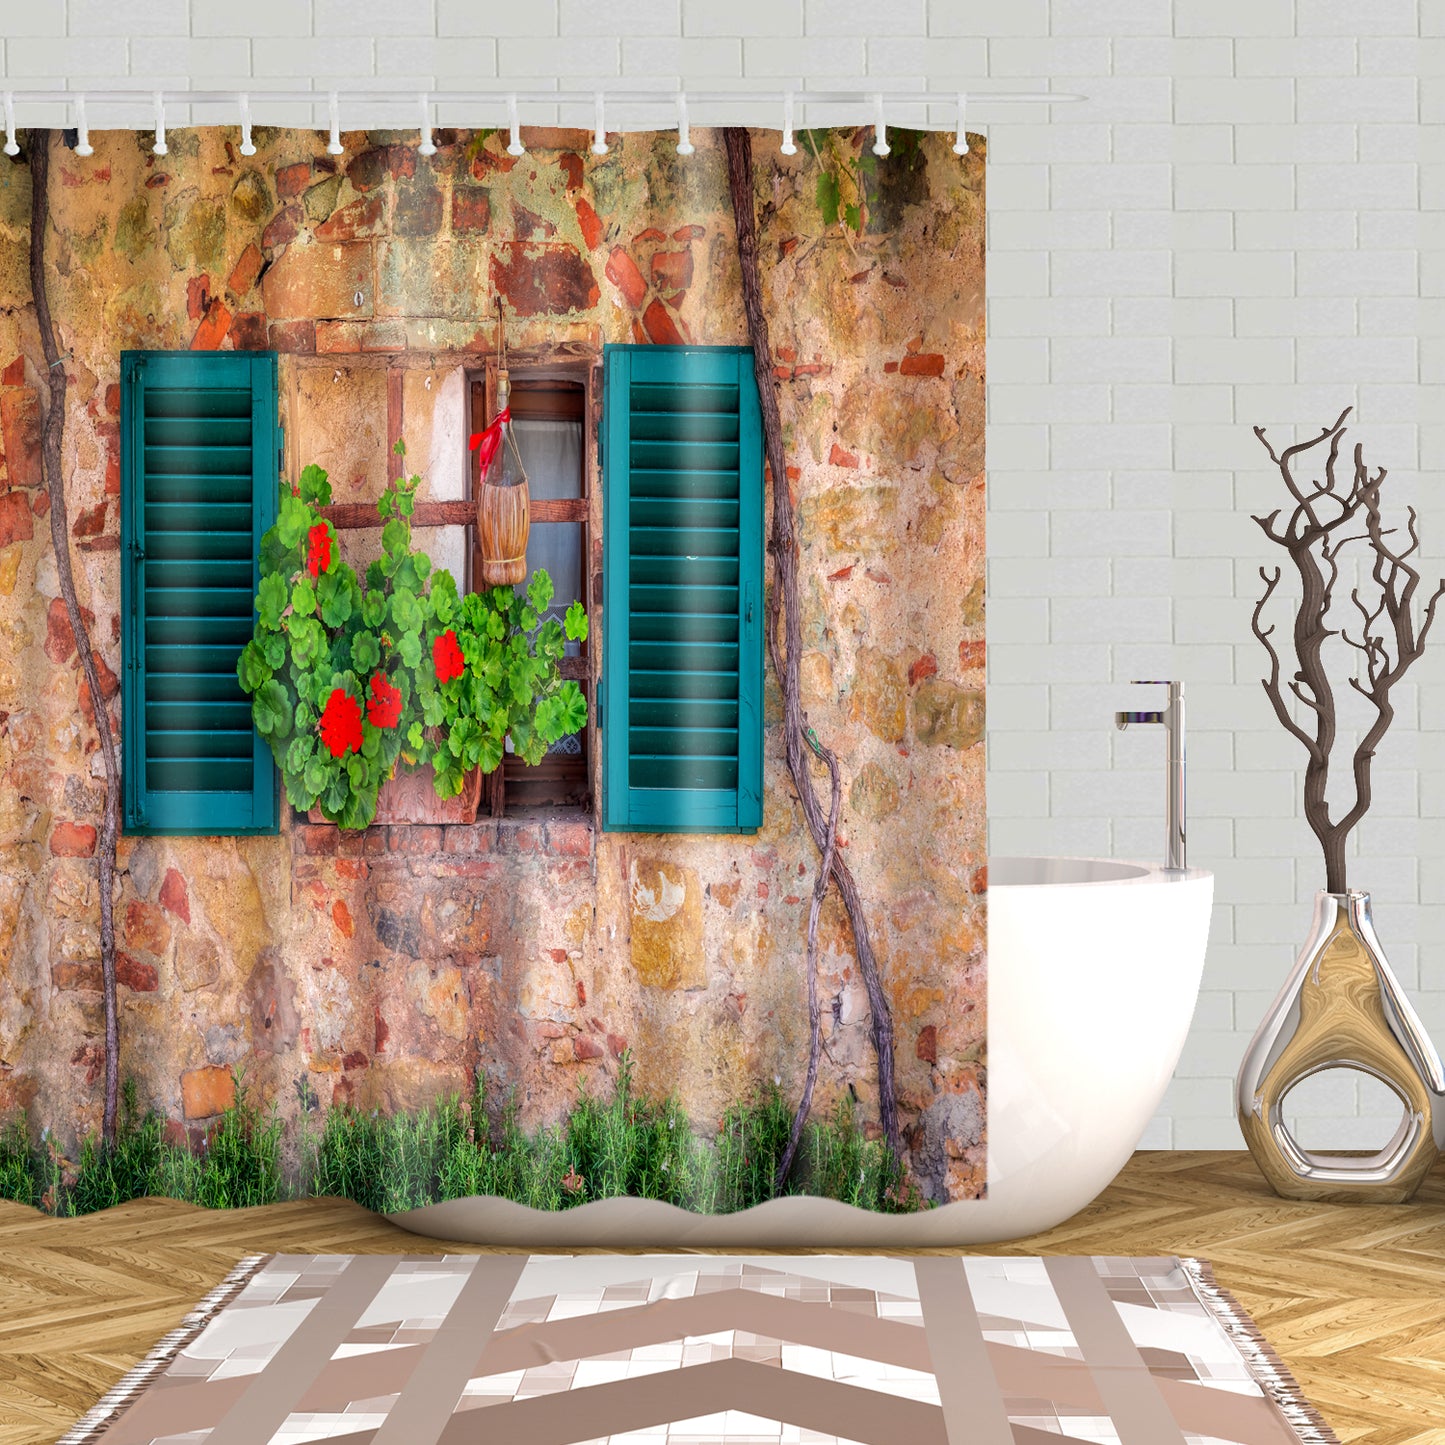 Spring Beautiful Window Decorated with Flowers Mural Shower Curtain